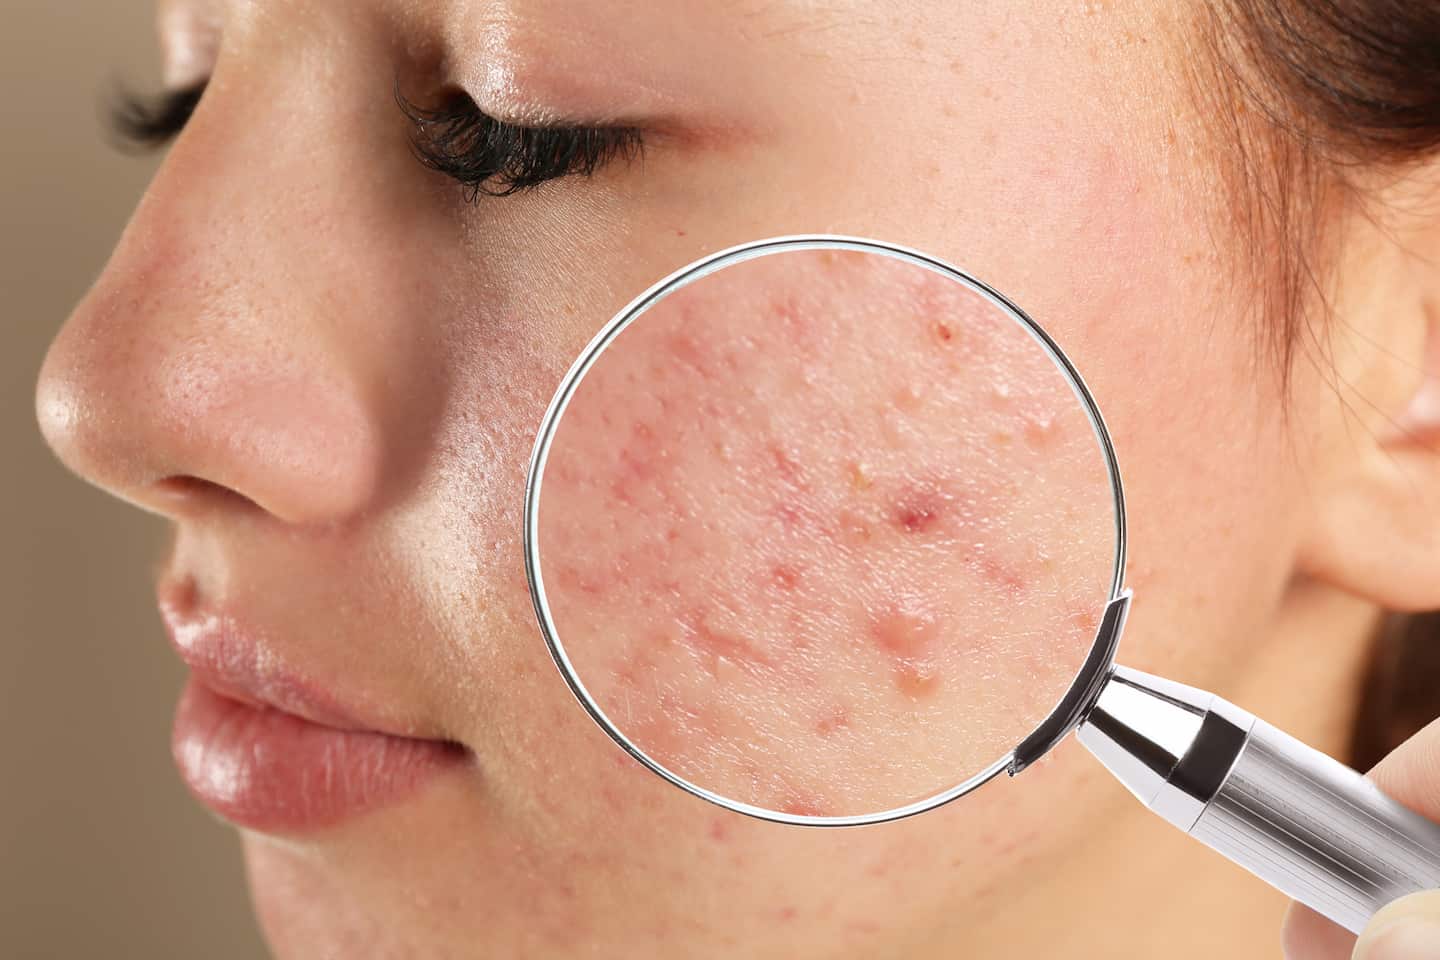 Habits That Could Be Causing Your Acne Flares